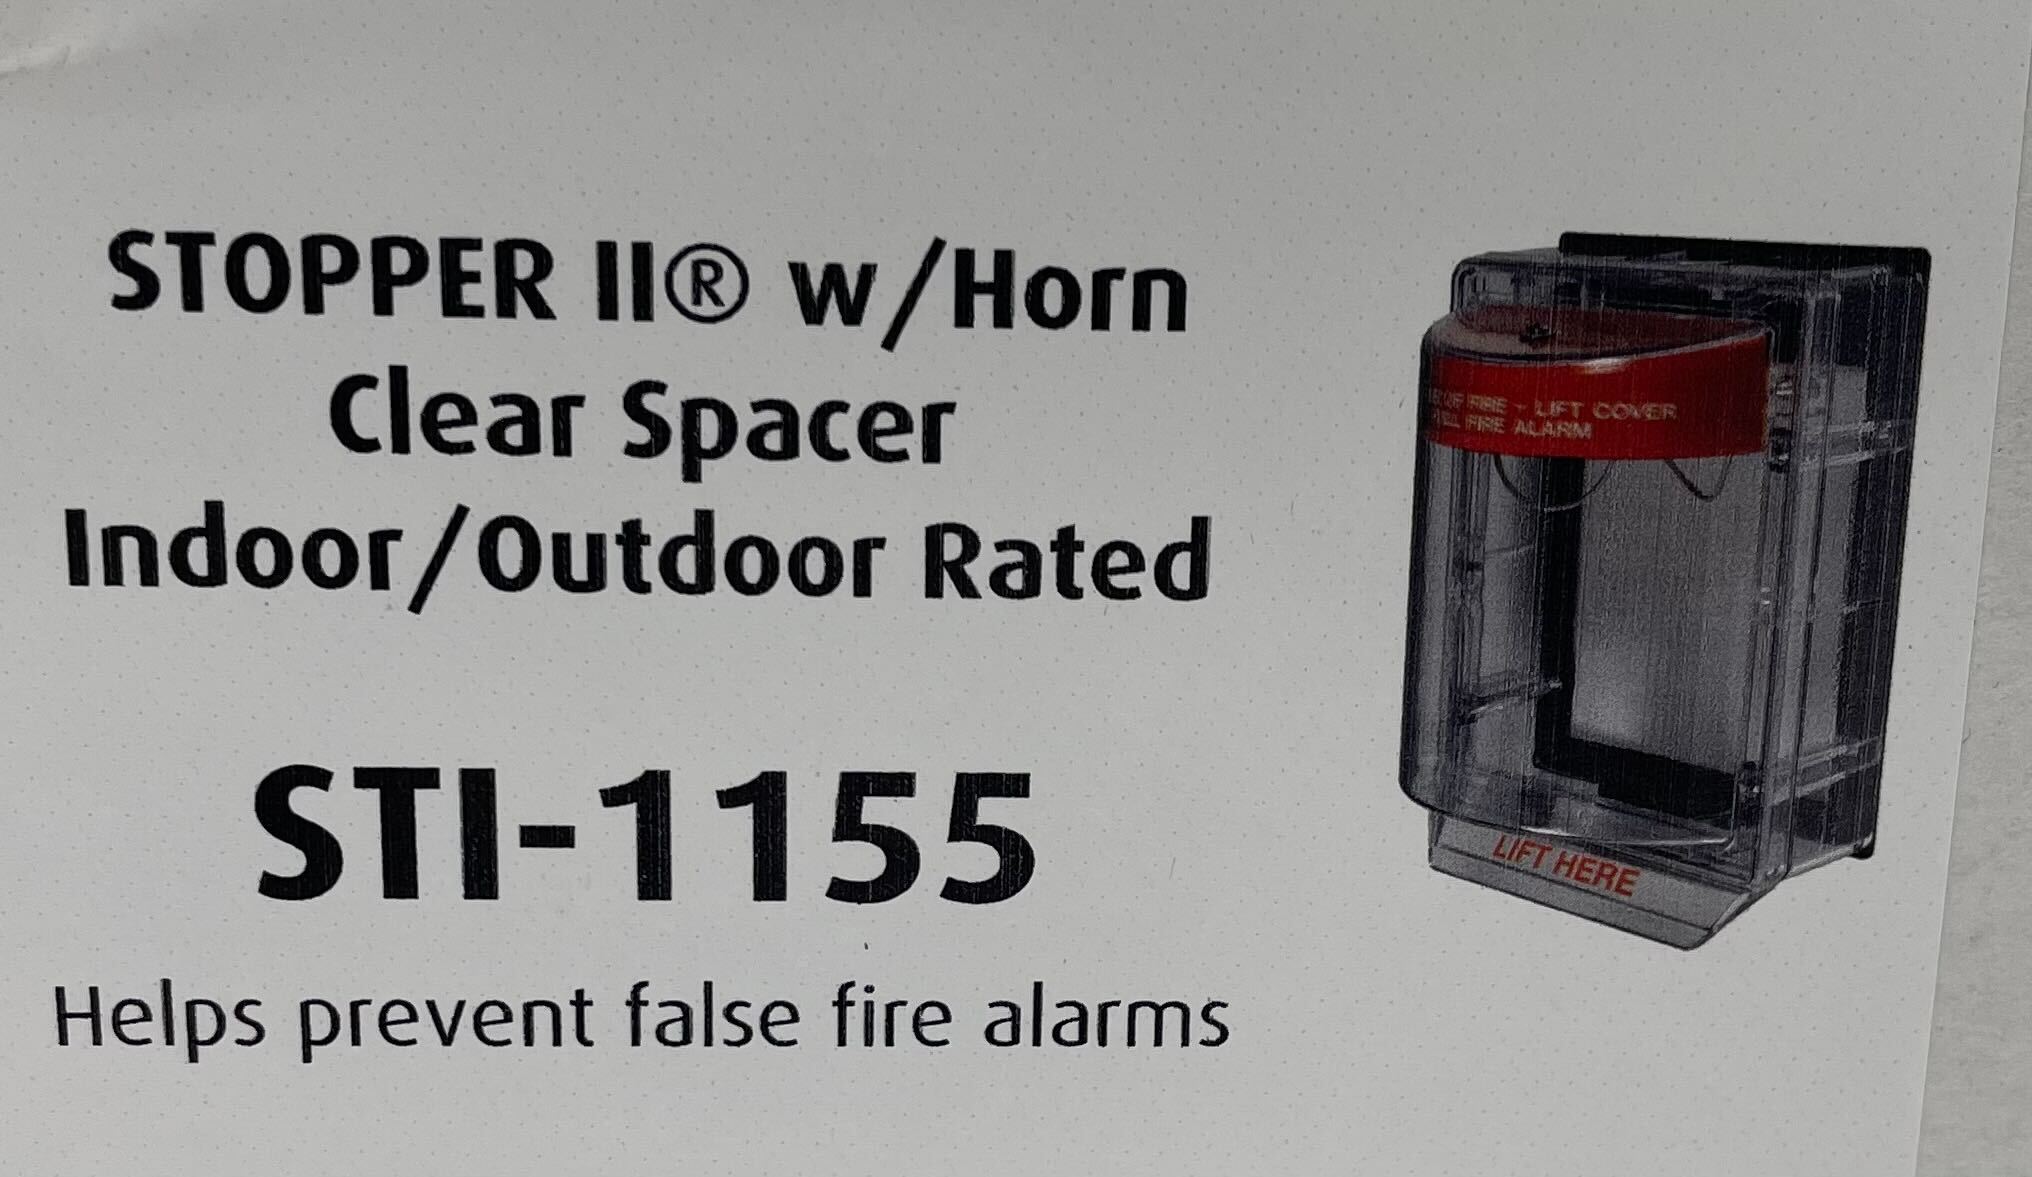 STI-1155 Stopper II with Horn and Spacer (Indoor/Outdoor Rated), Fire Label - The Fire Alarm Supplier